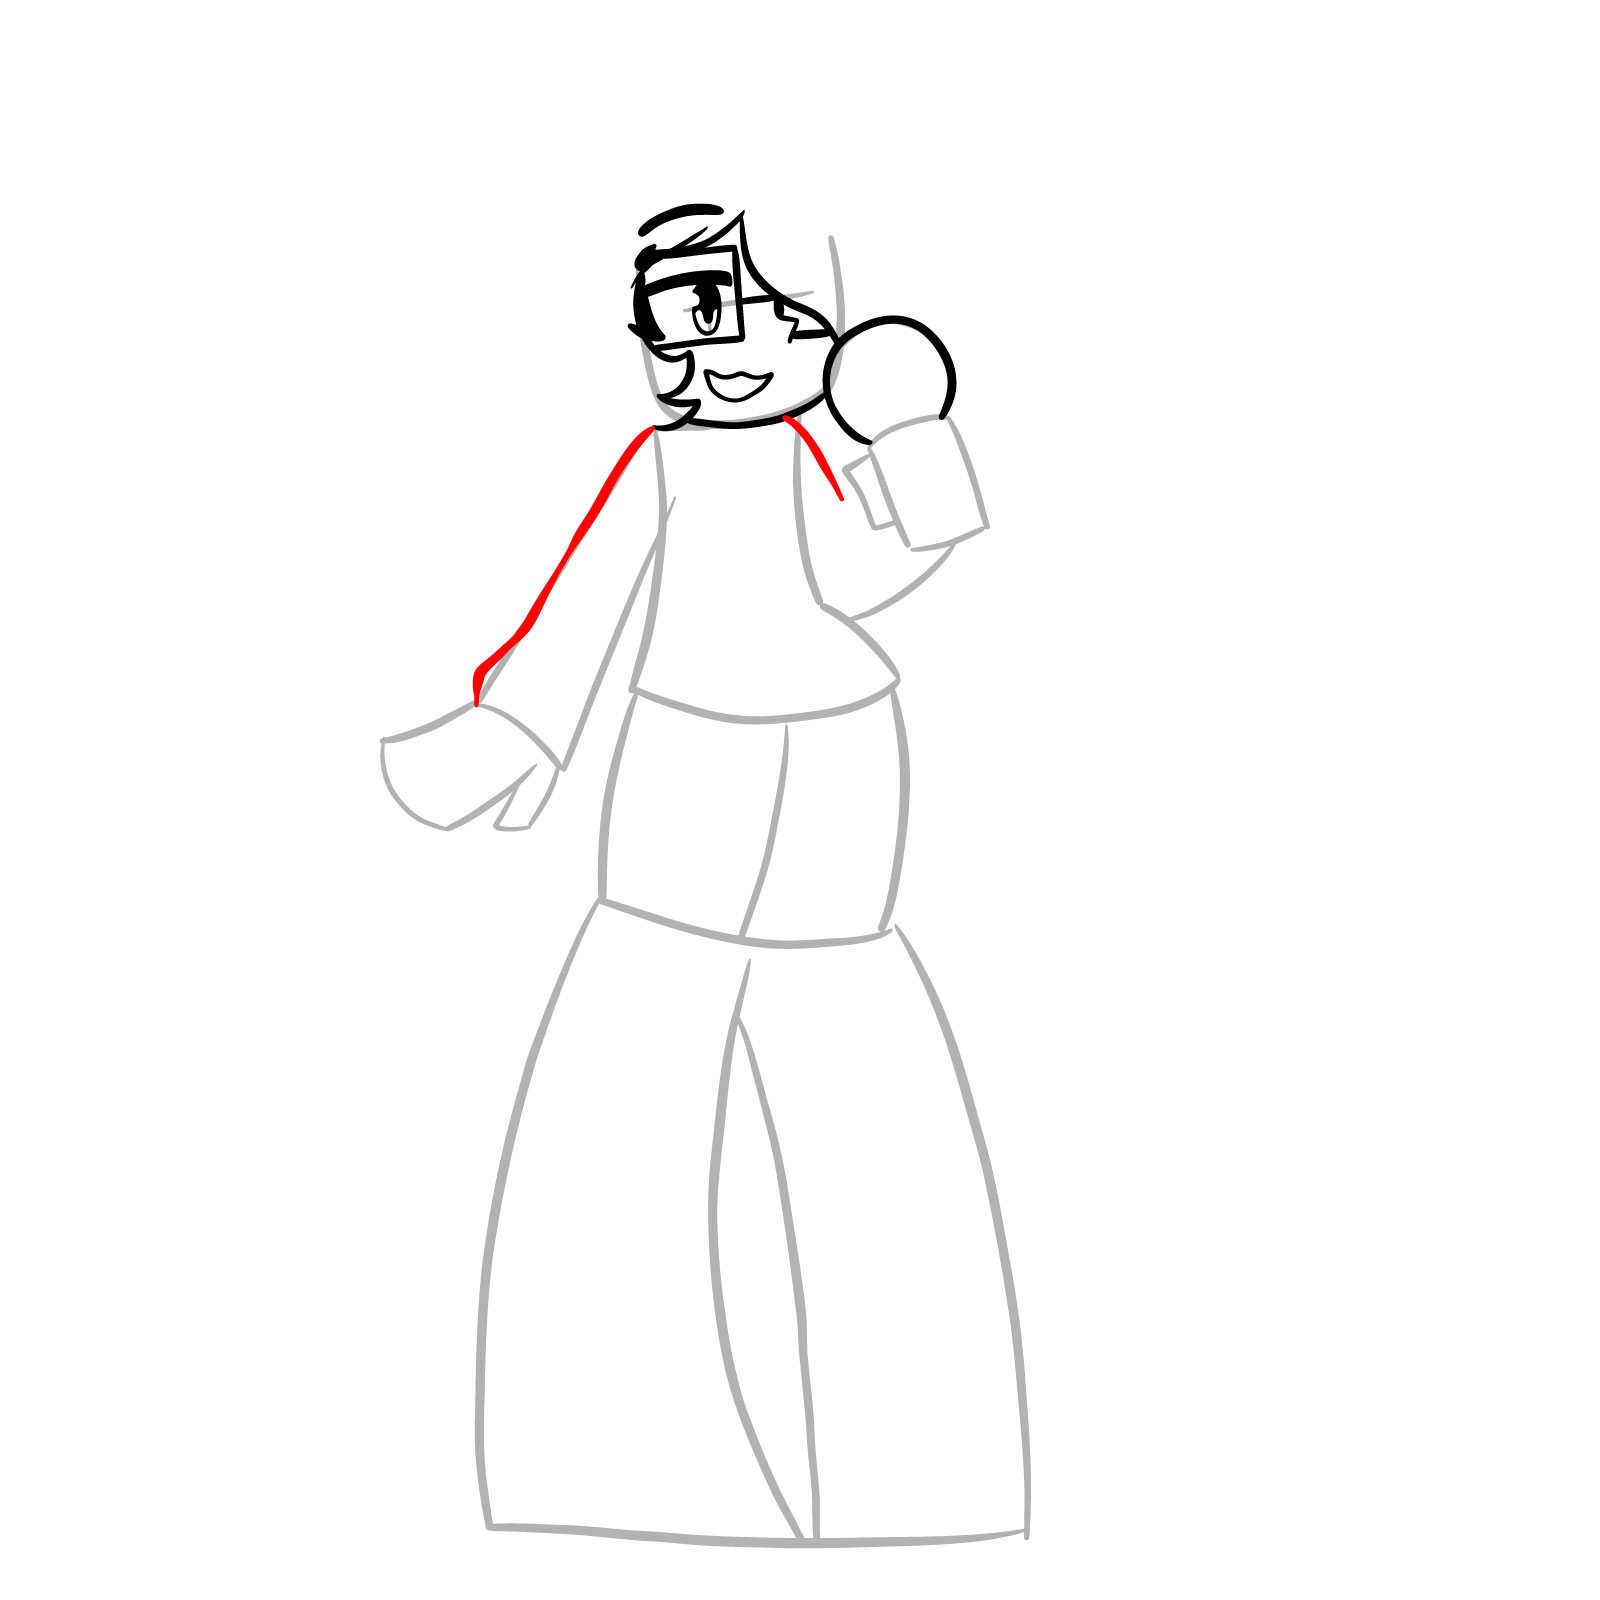 How to draw Vade from FNF - step 11